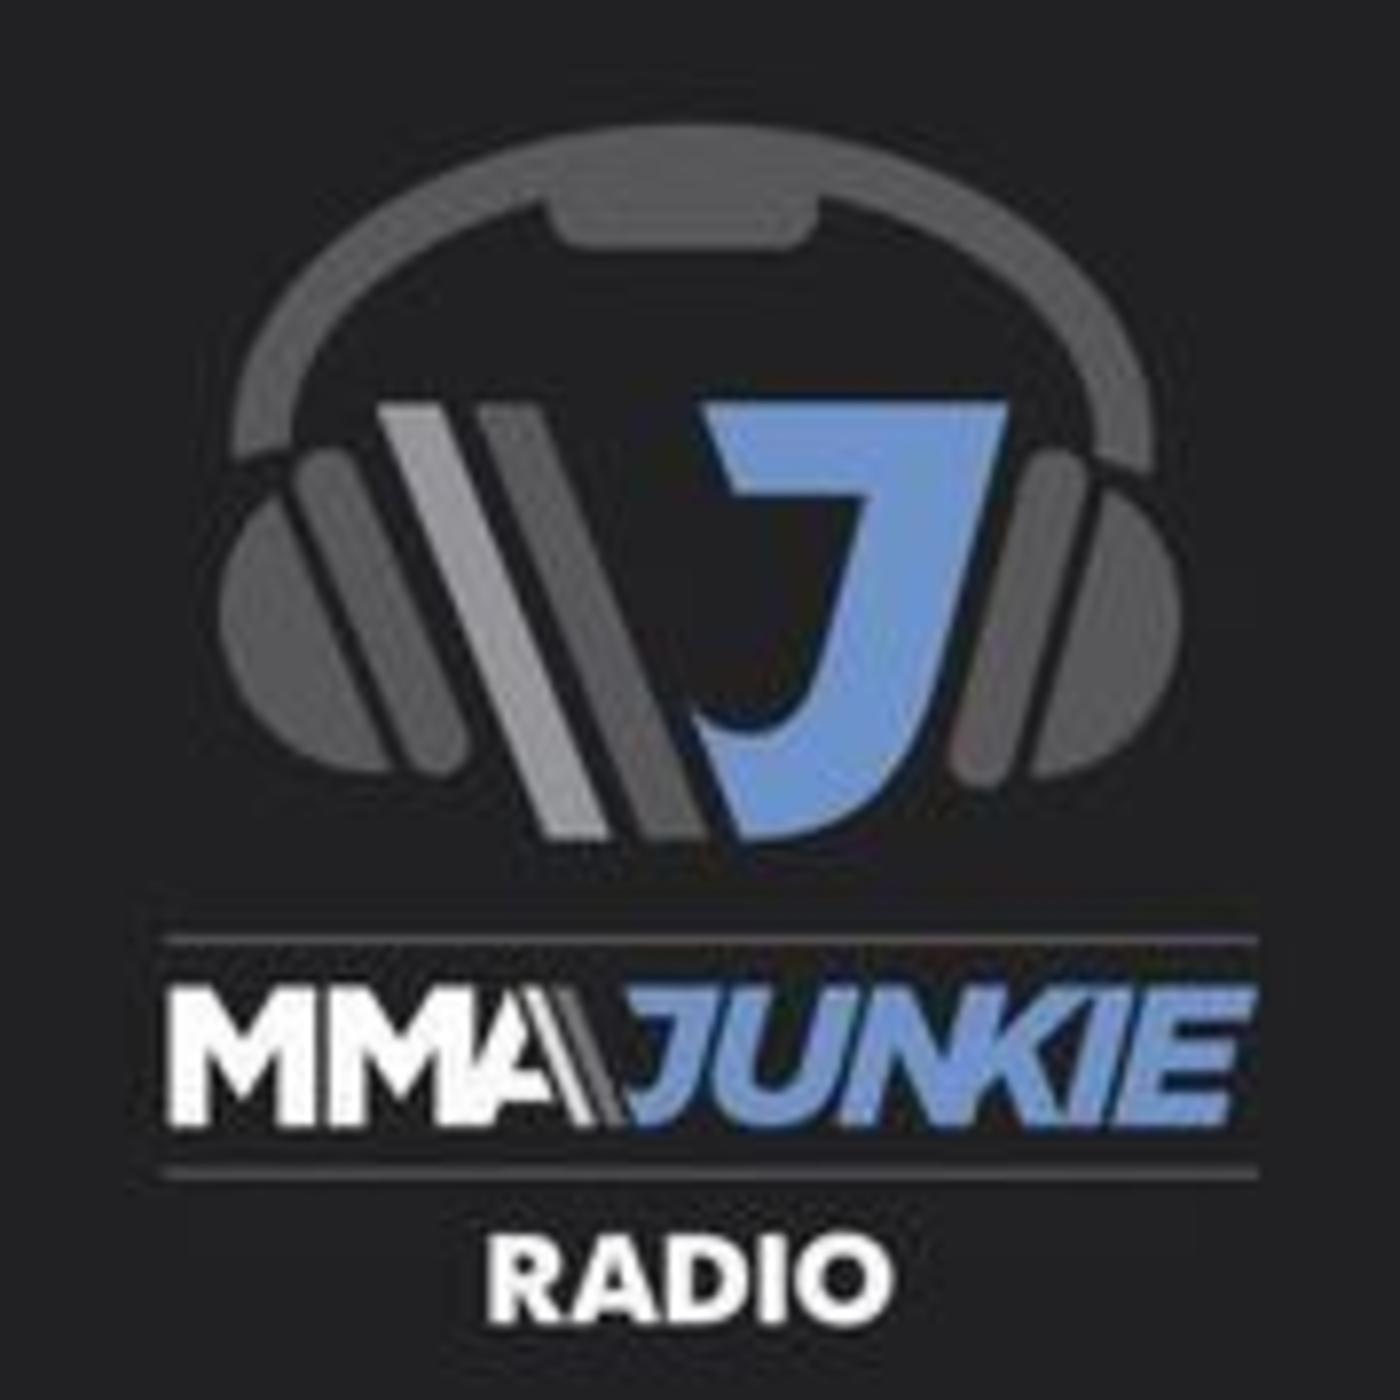 Ep. 3,046: Halle Berry loves MMA, Corey Anderson apologies to Jon Jones, Burt Watson says fight island could be successful, more